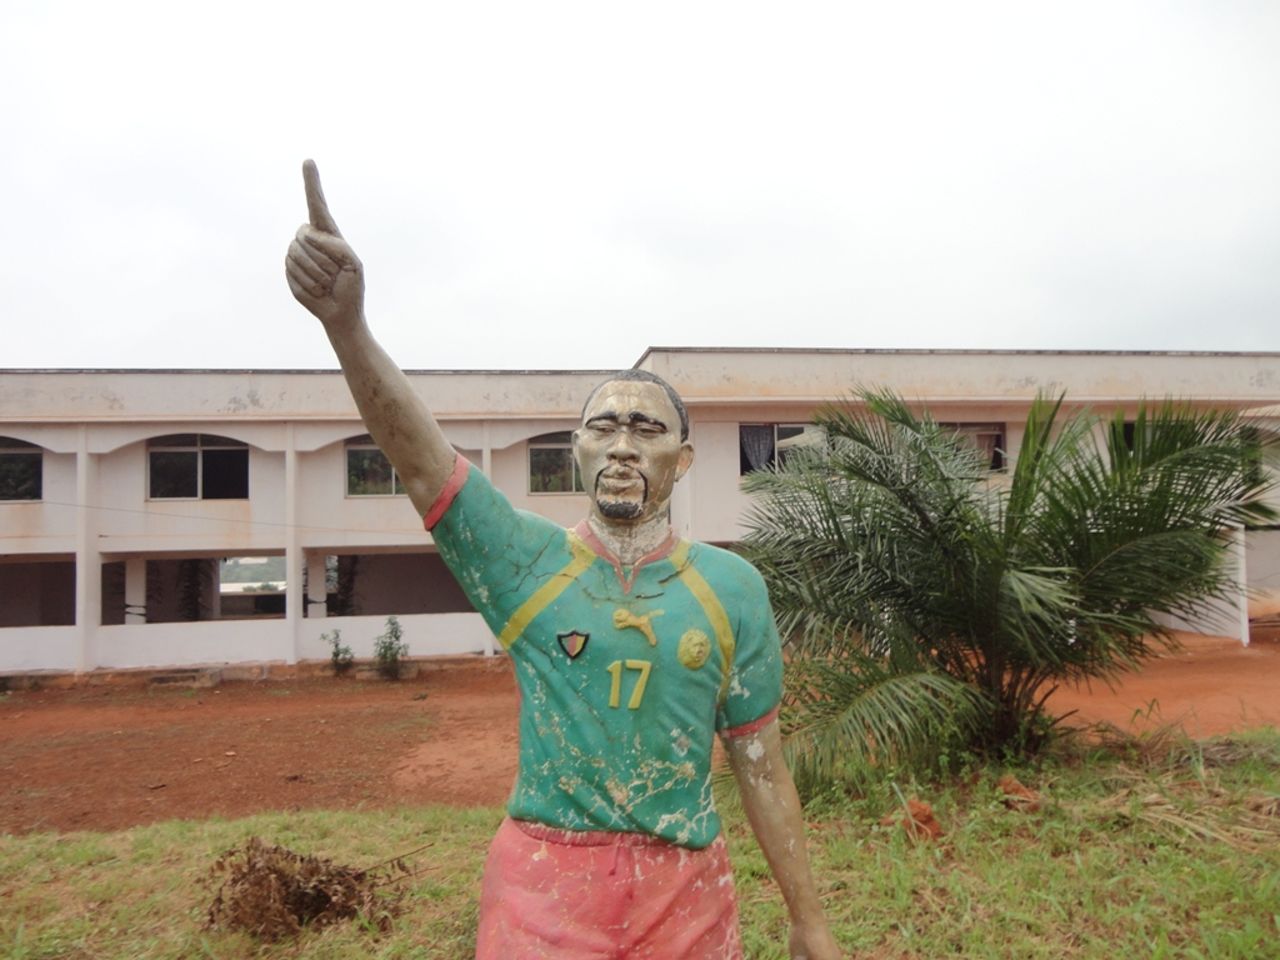 Back in Cameroon, the $10 million sports complex Foe started is in need of repair -- even the statue of the great midfielder. 